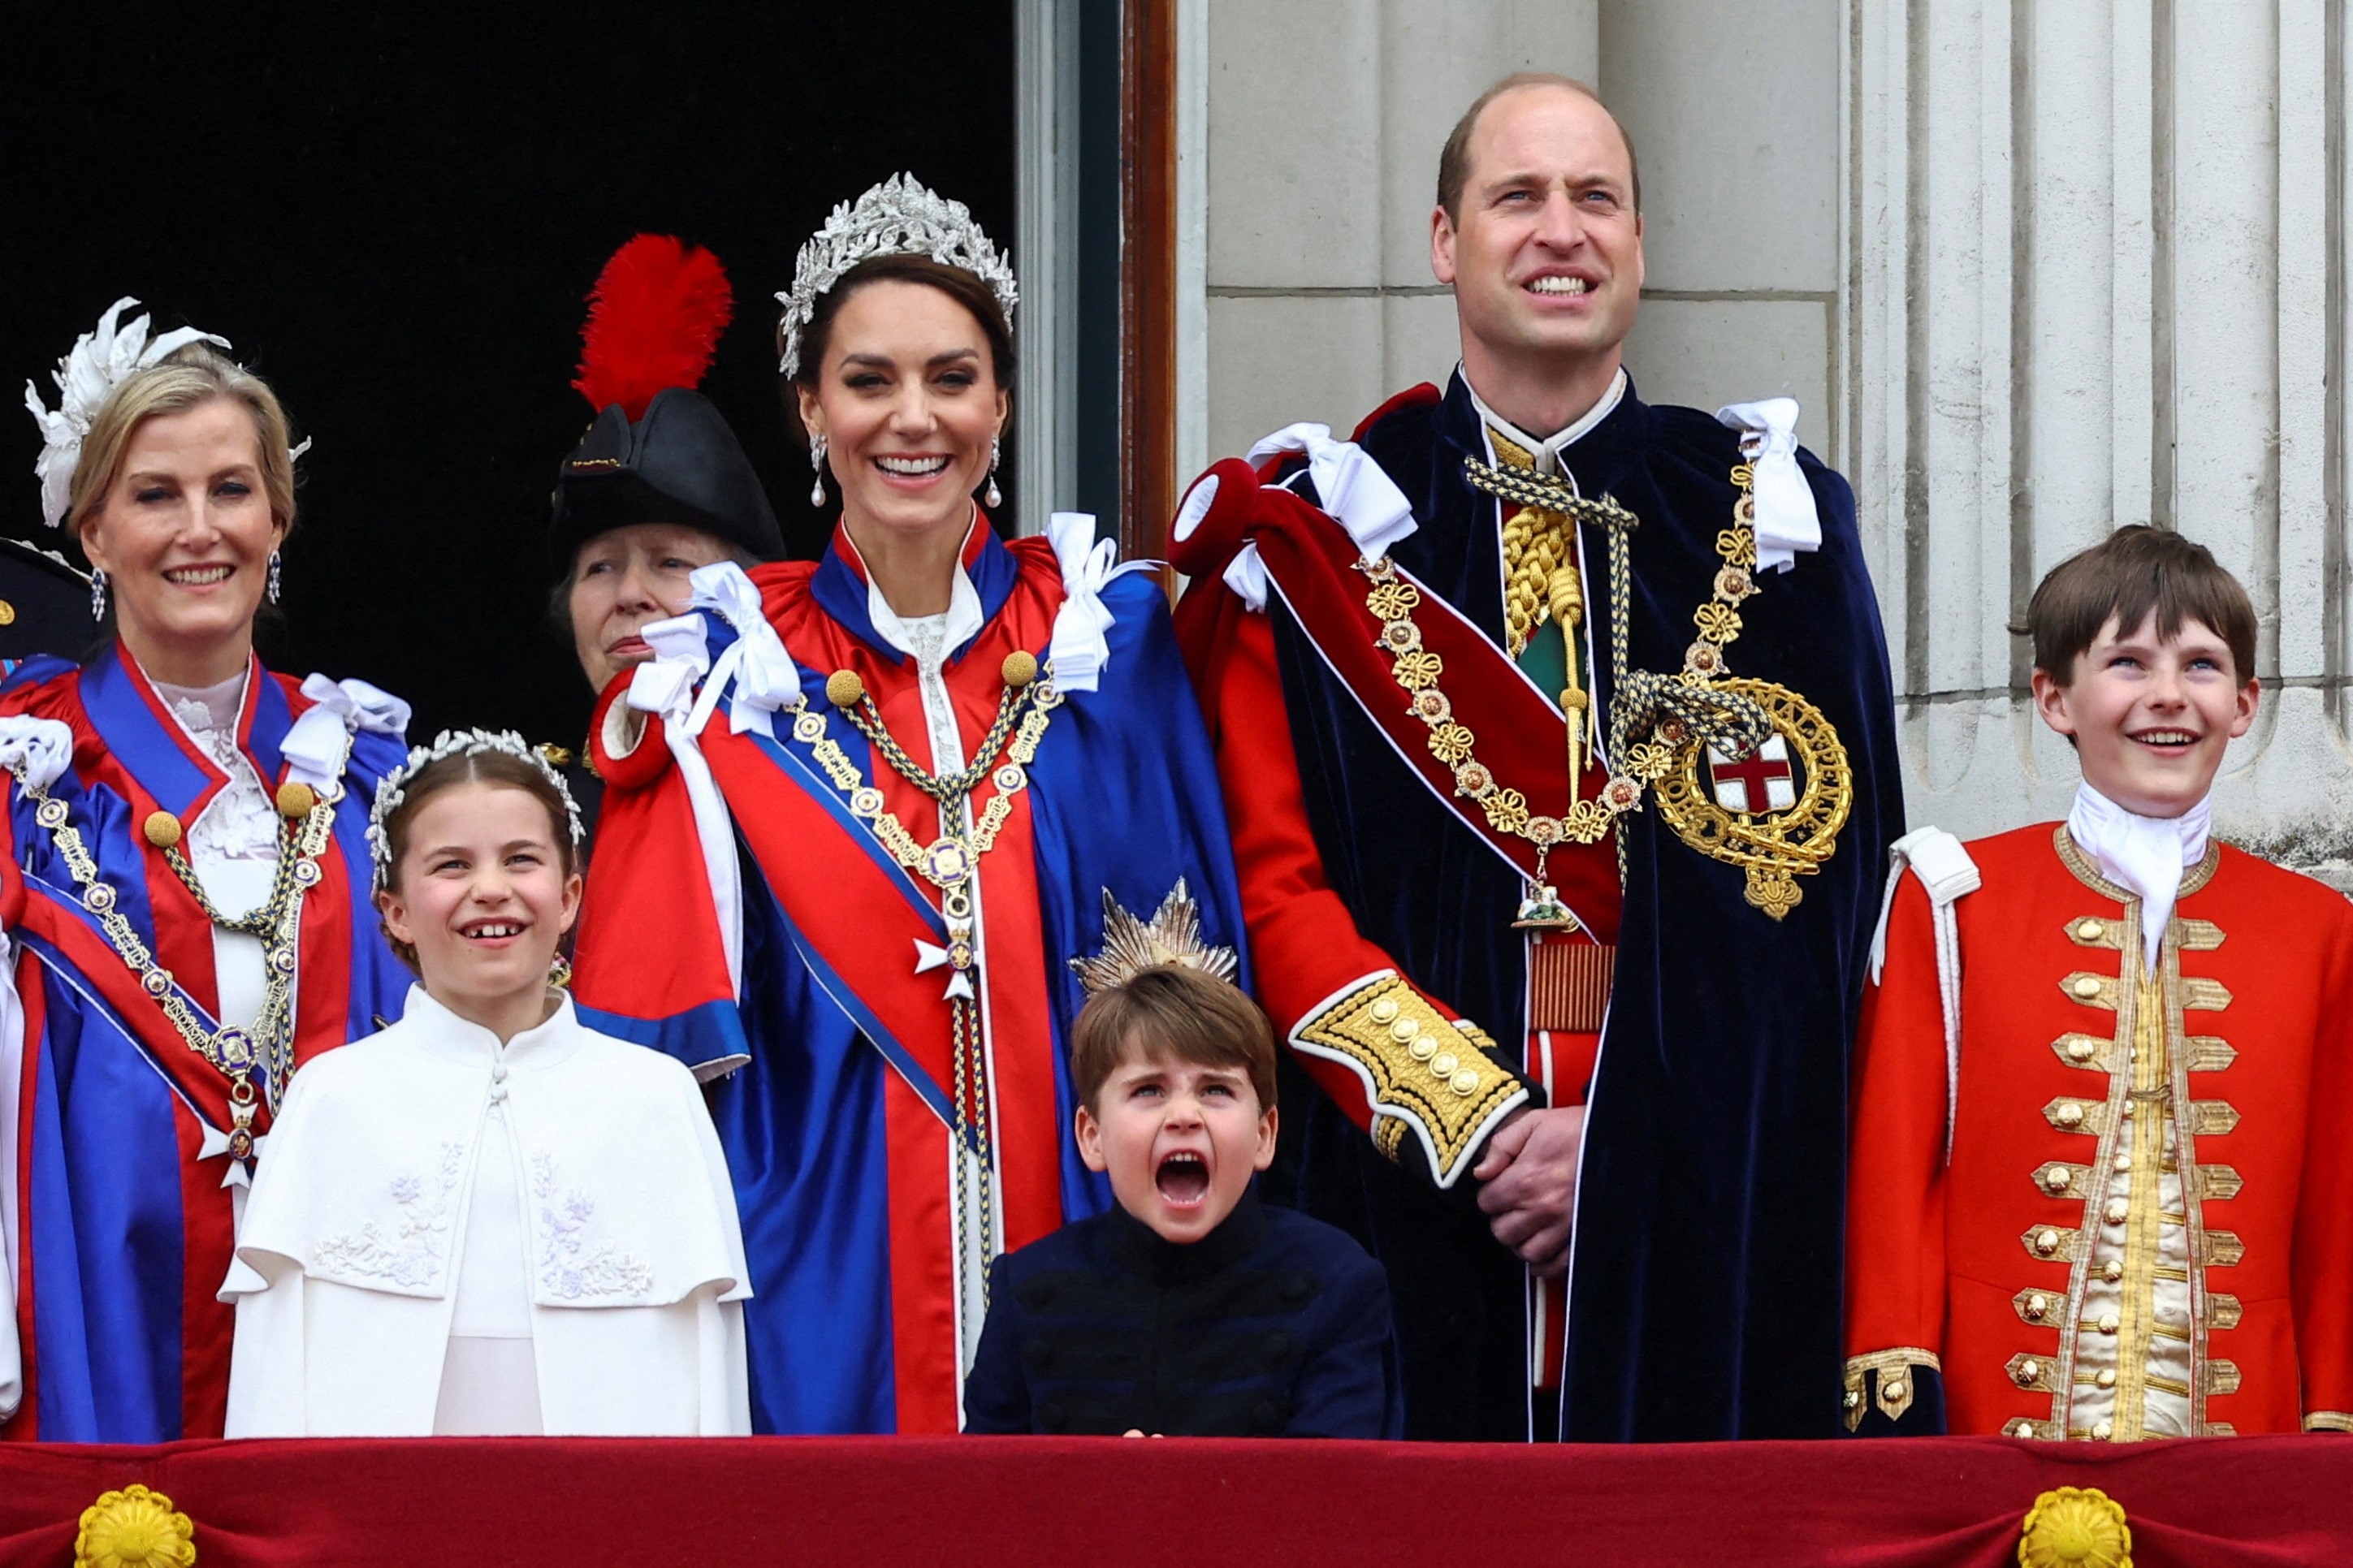 King Charles III crowned in ceremony blending history and change